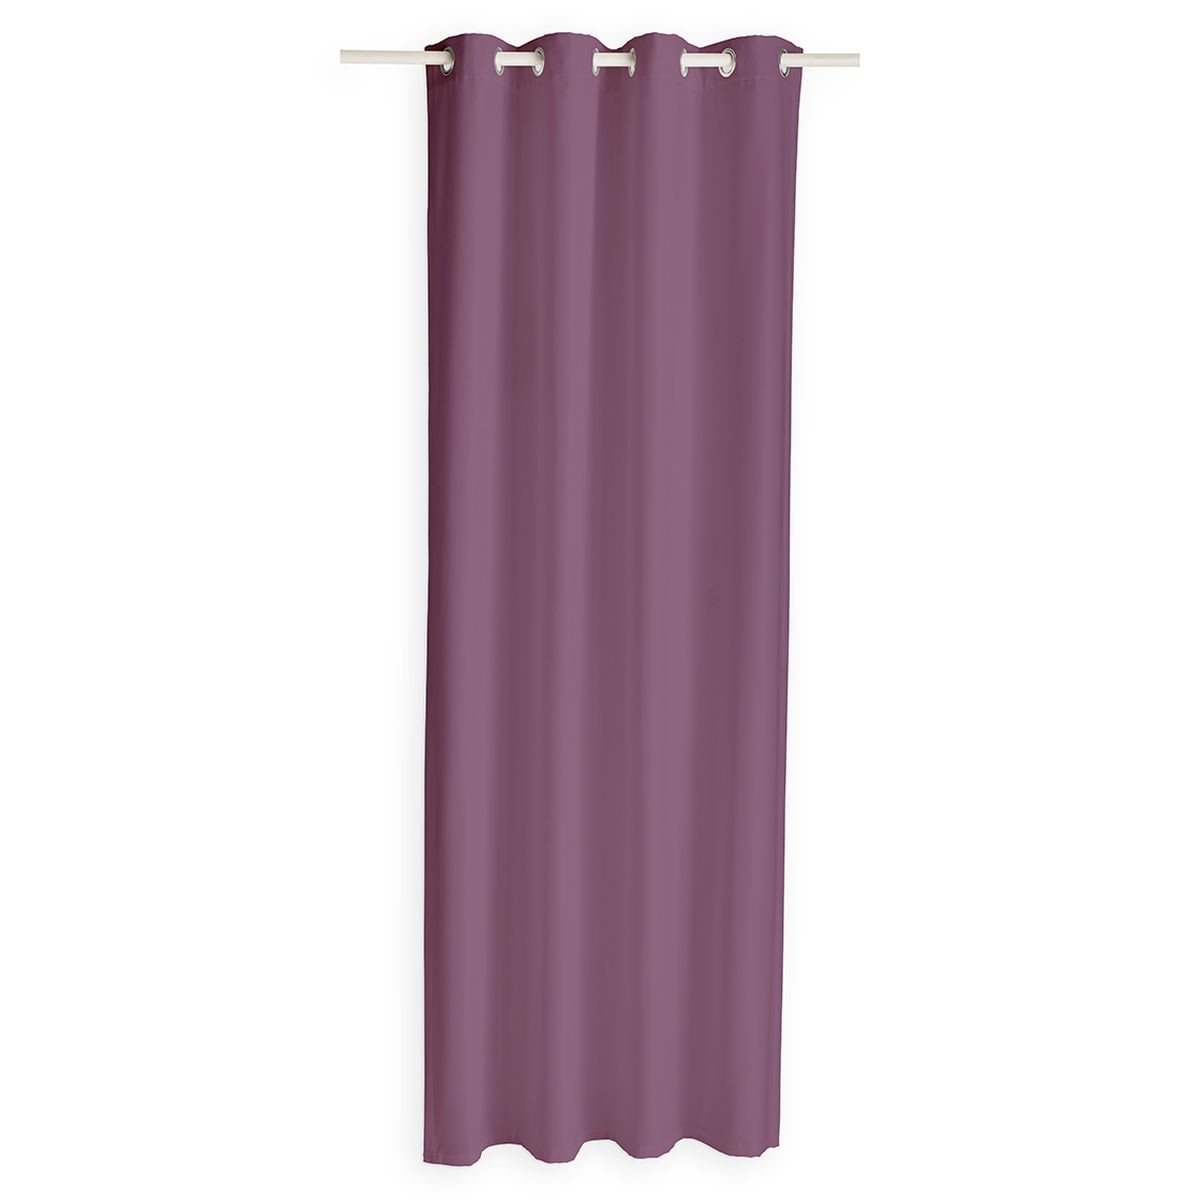 Home Curtains & blinds Today TODAY OCCULTANT Purple